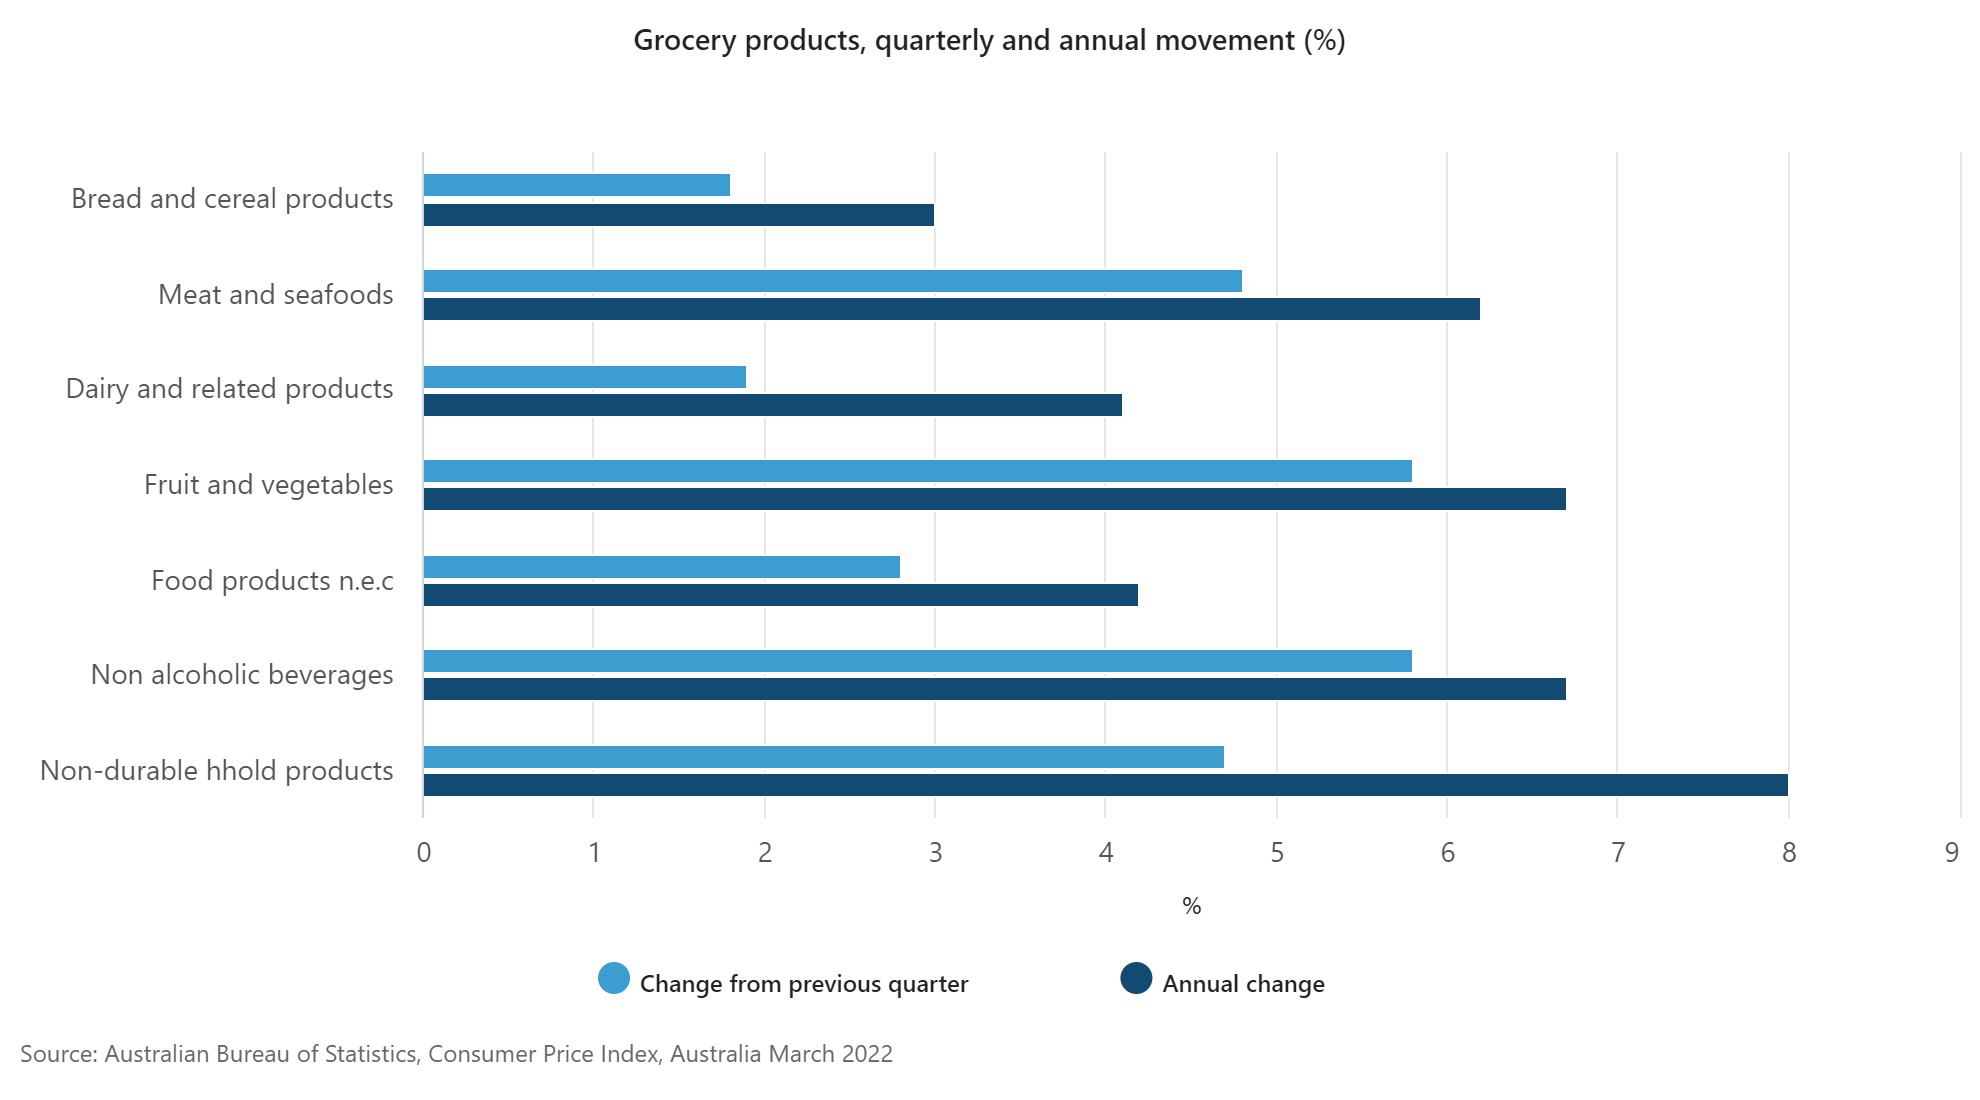 Quarterly and annual price rises for grocery products were a key source of inflation.